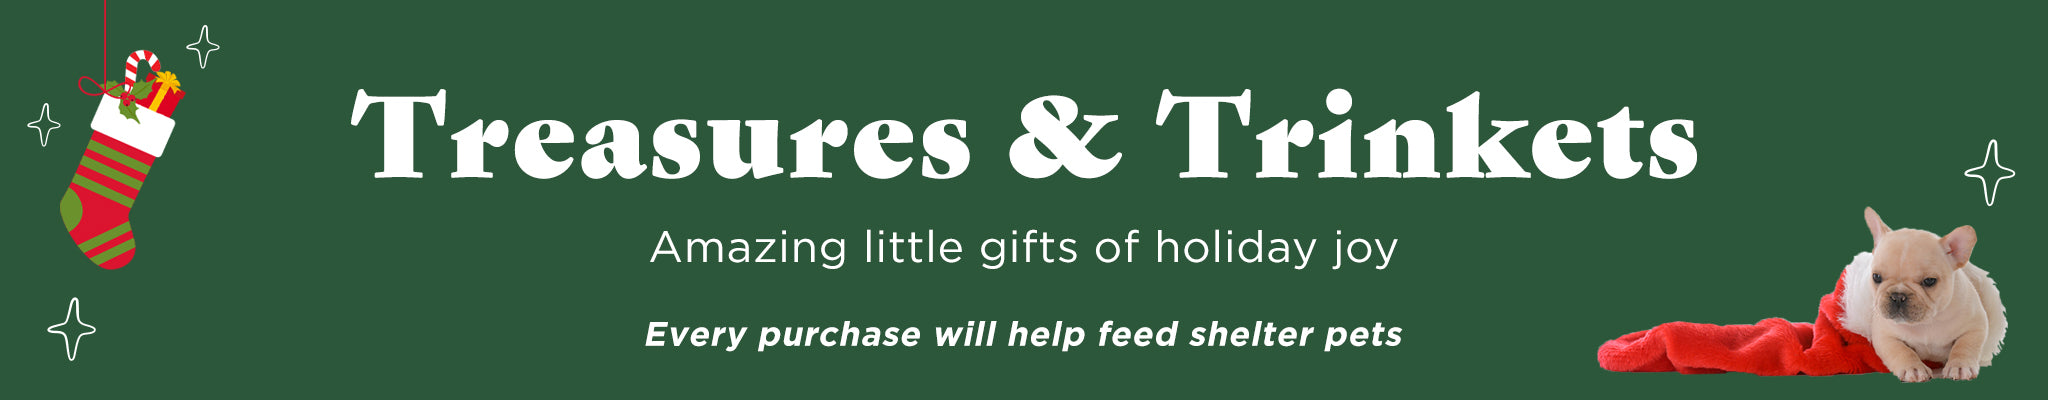 Treasures & Trinkets | Amazing little gifts of holiday joy | Every purchase will help feed shelter pets